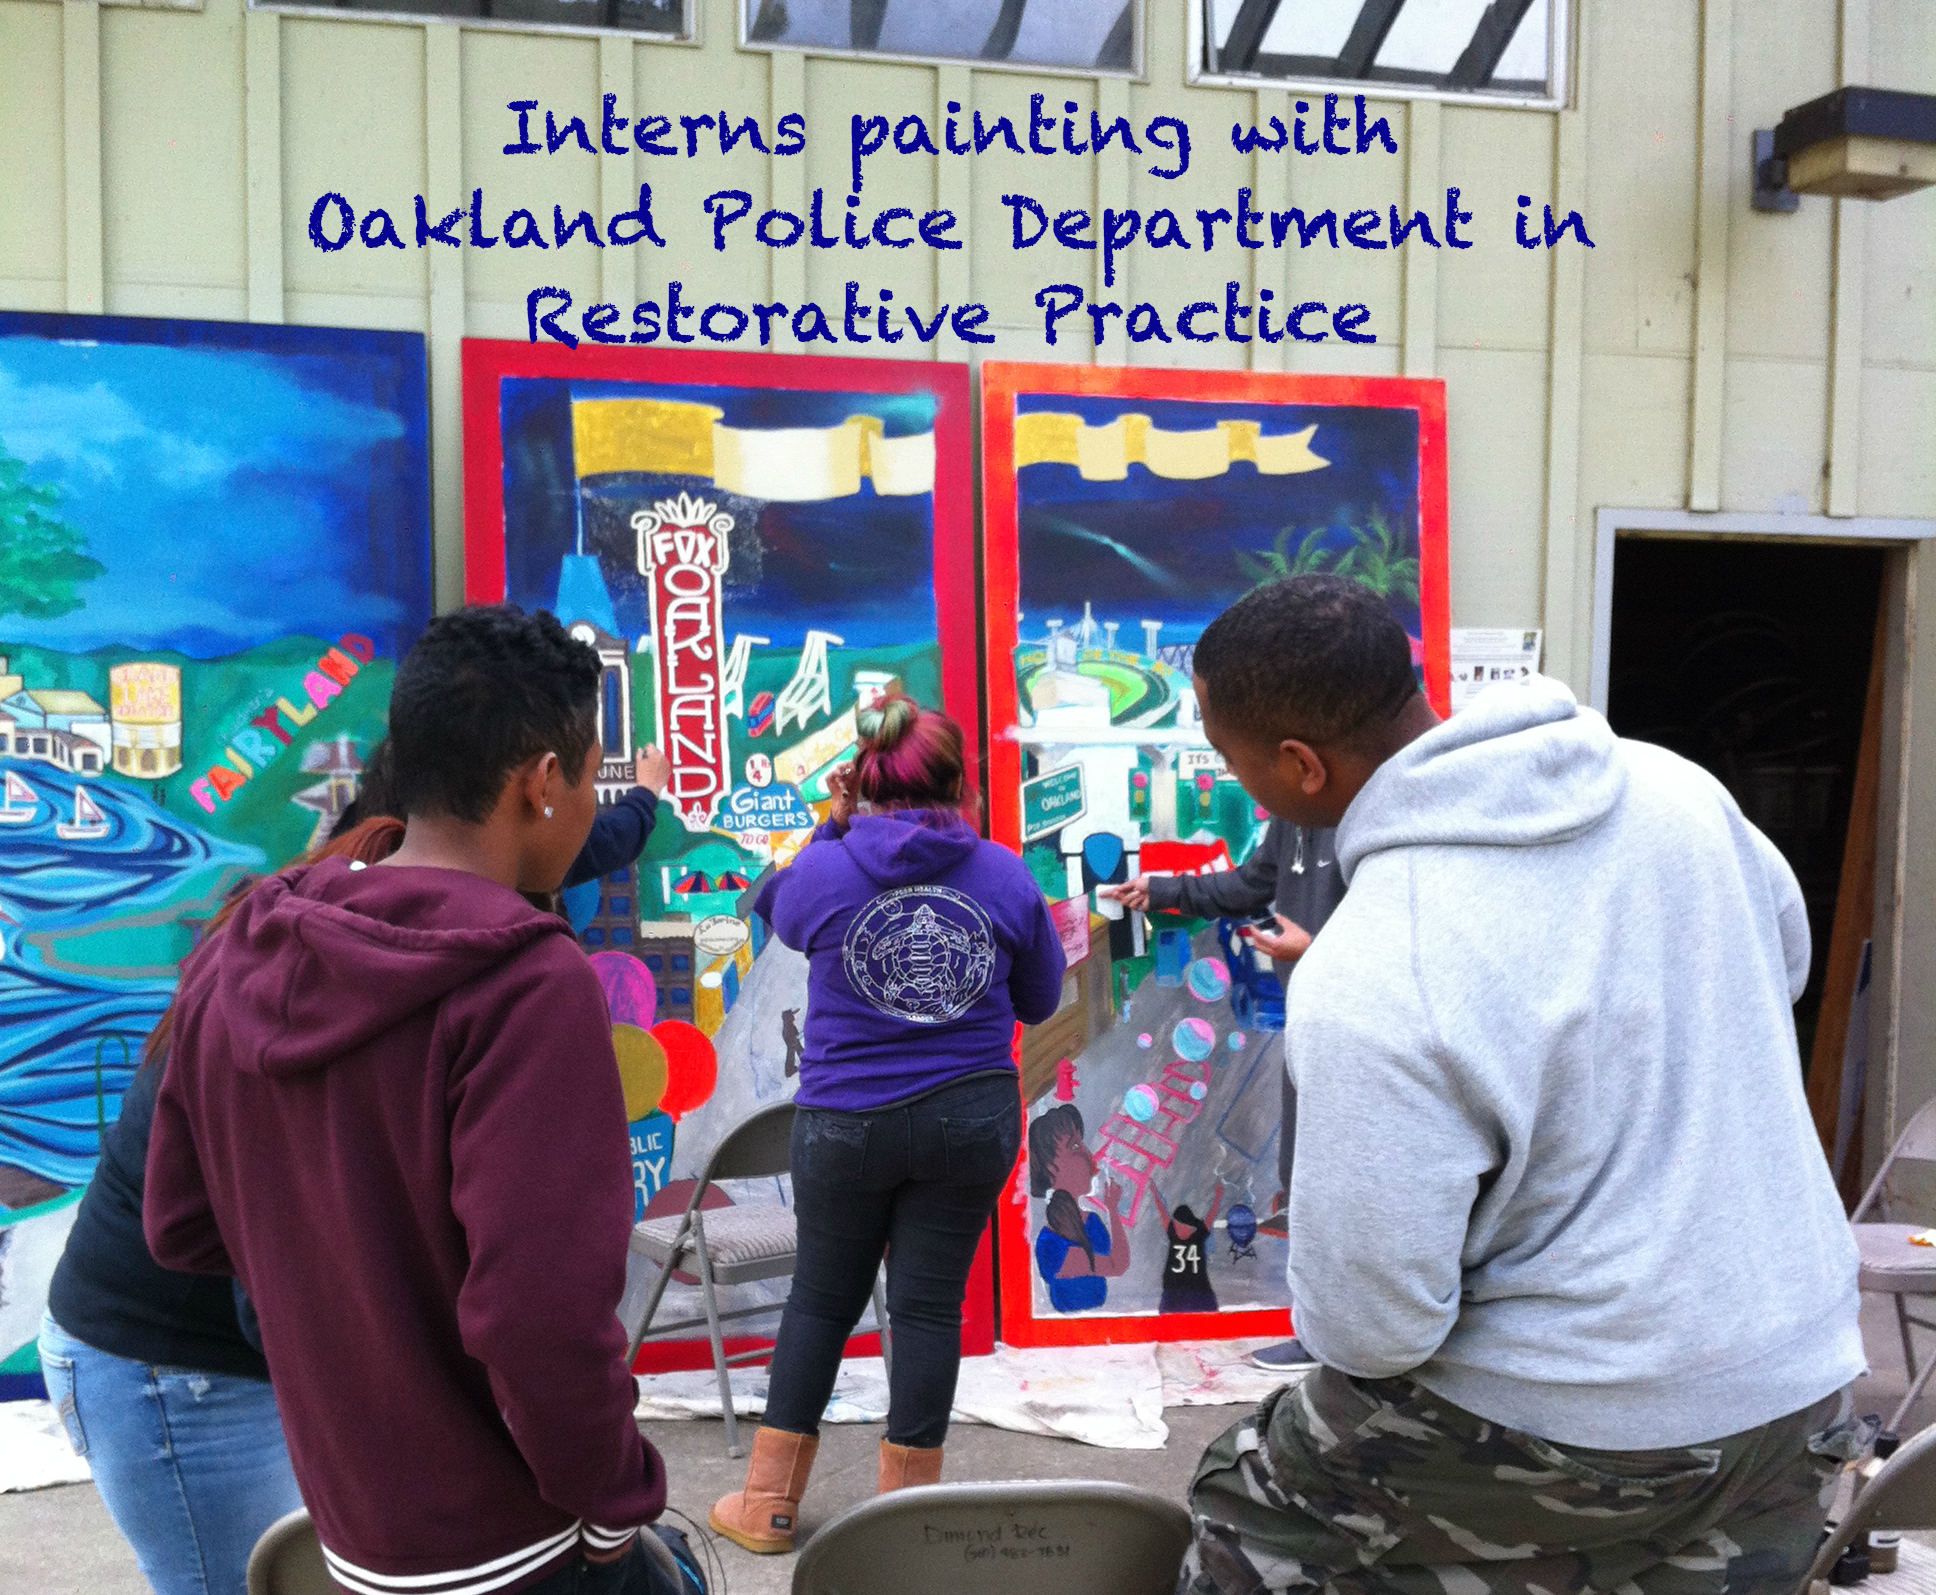 RPSC interns painting with Oakland Police Department in Restorative Practice 2.jpg